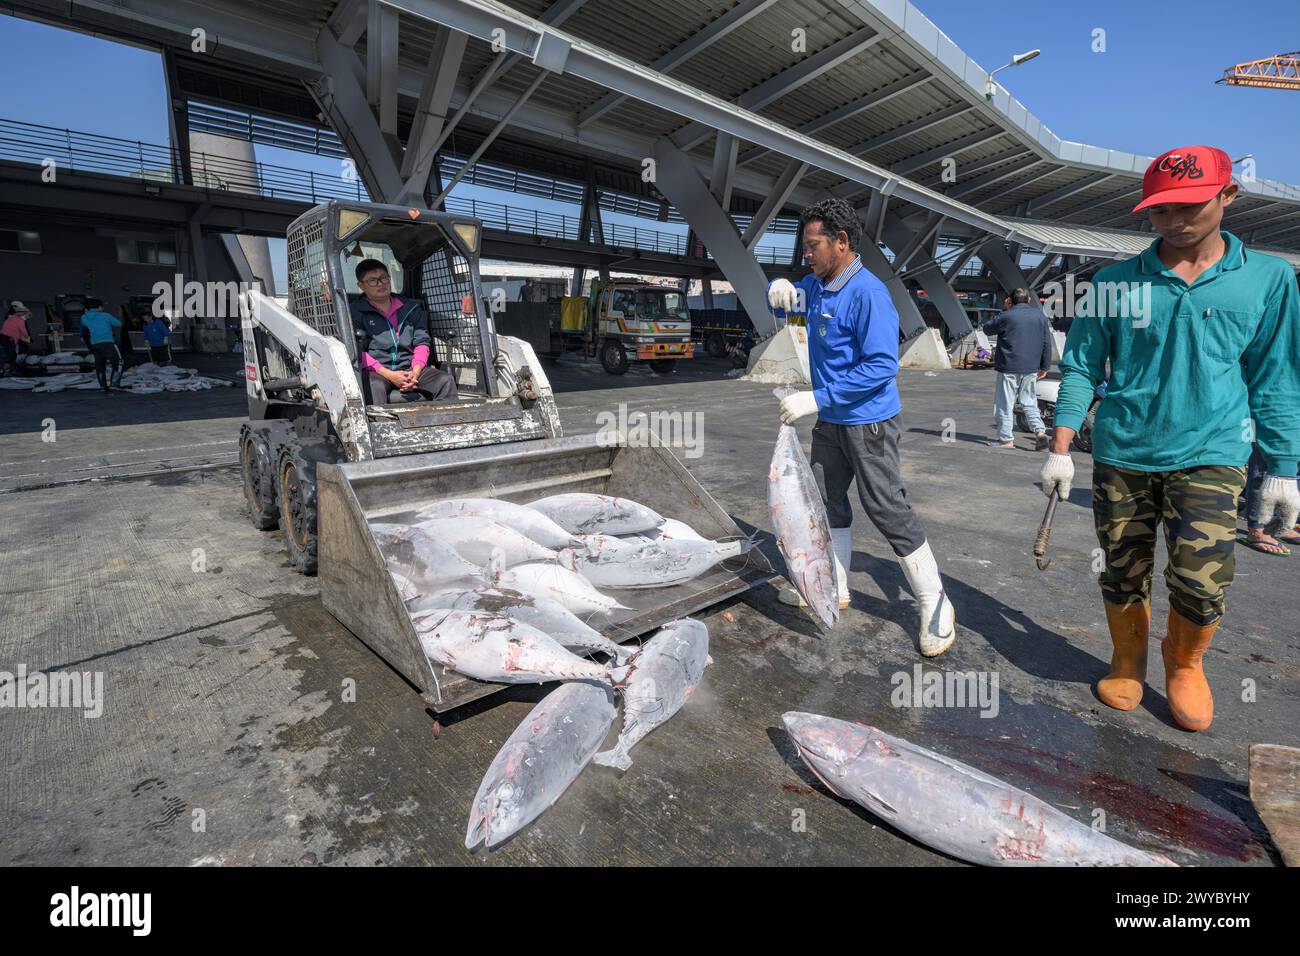 Fishermen in a port downloading frozen fish from a boat  on a sunny day, loading them ready to sell Stock Photo